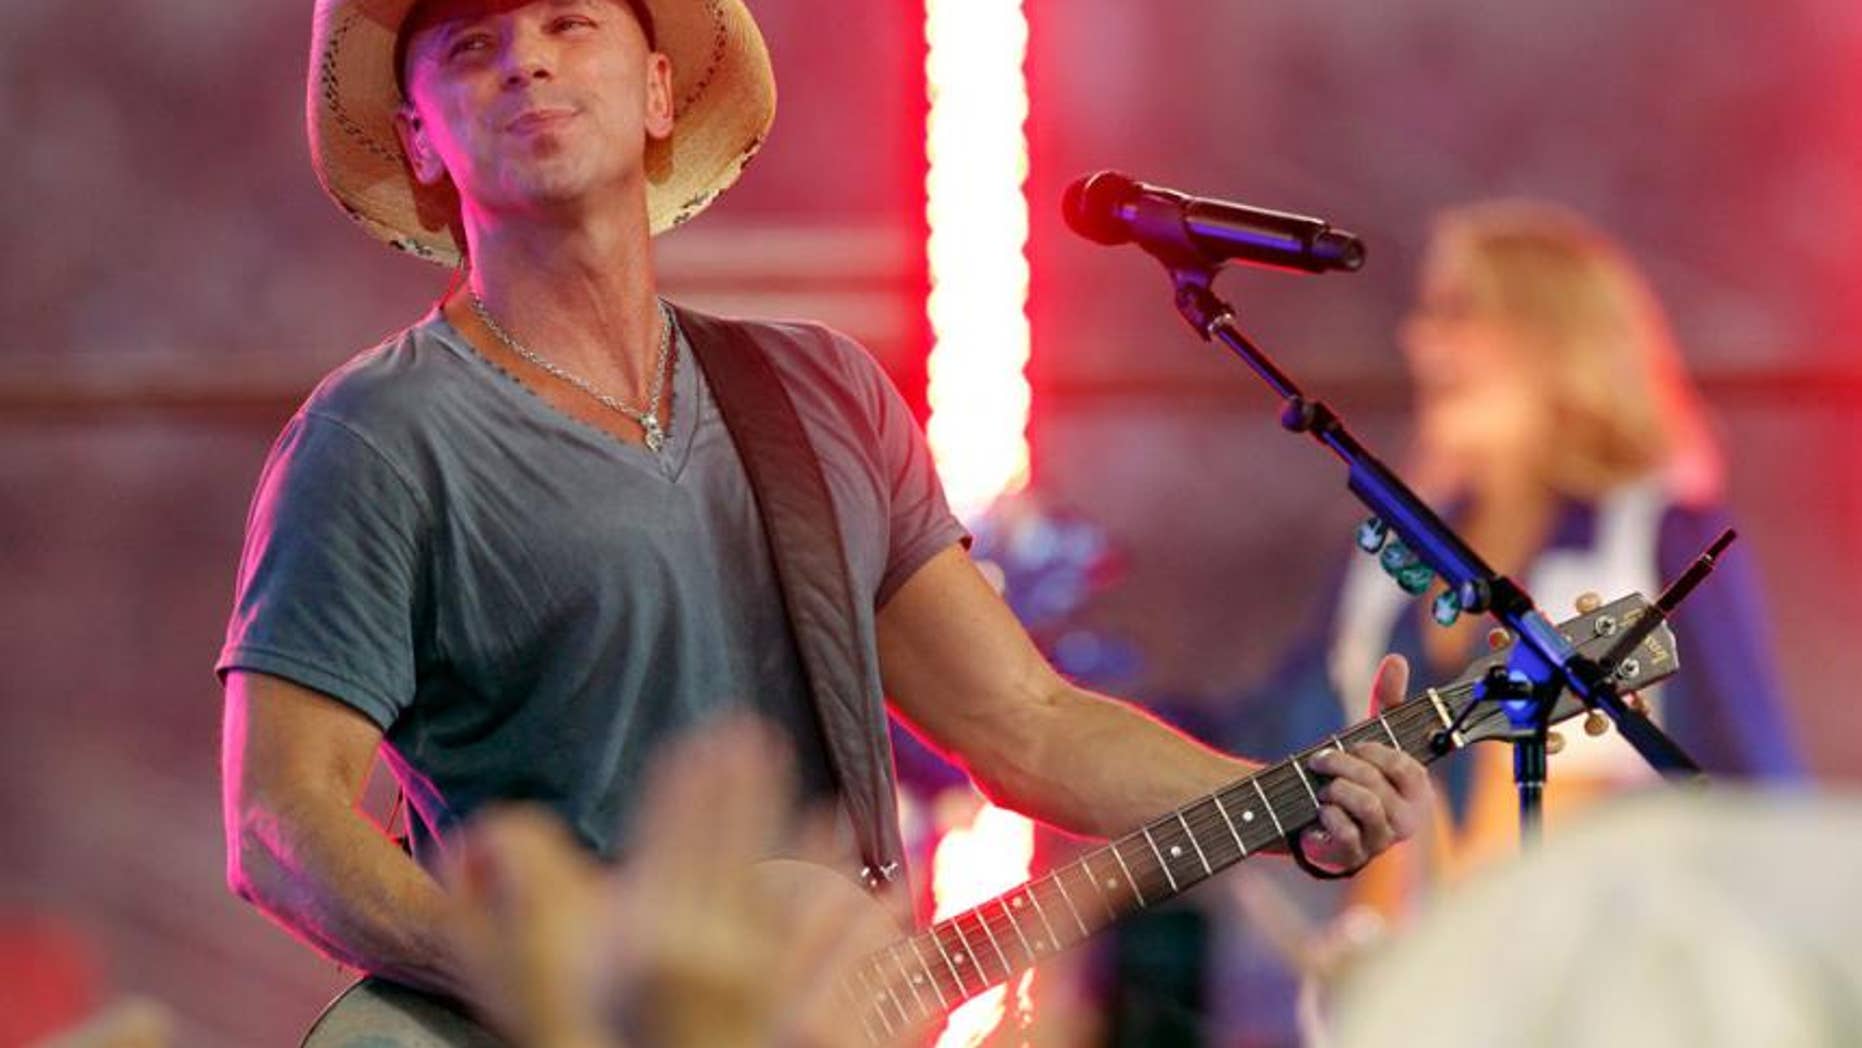 Kenny Chesney continues show after injuring himself onstage | Fox News